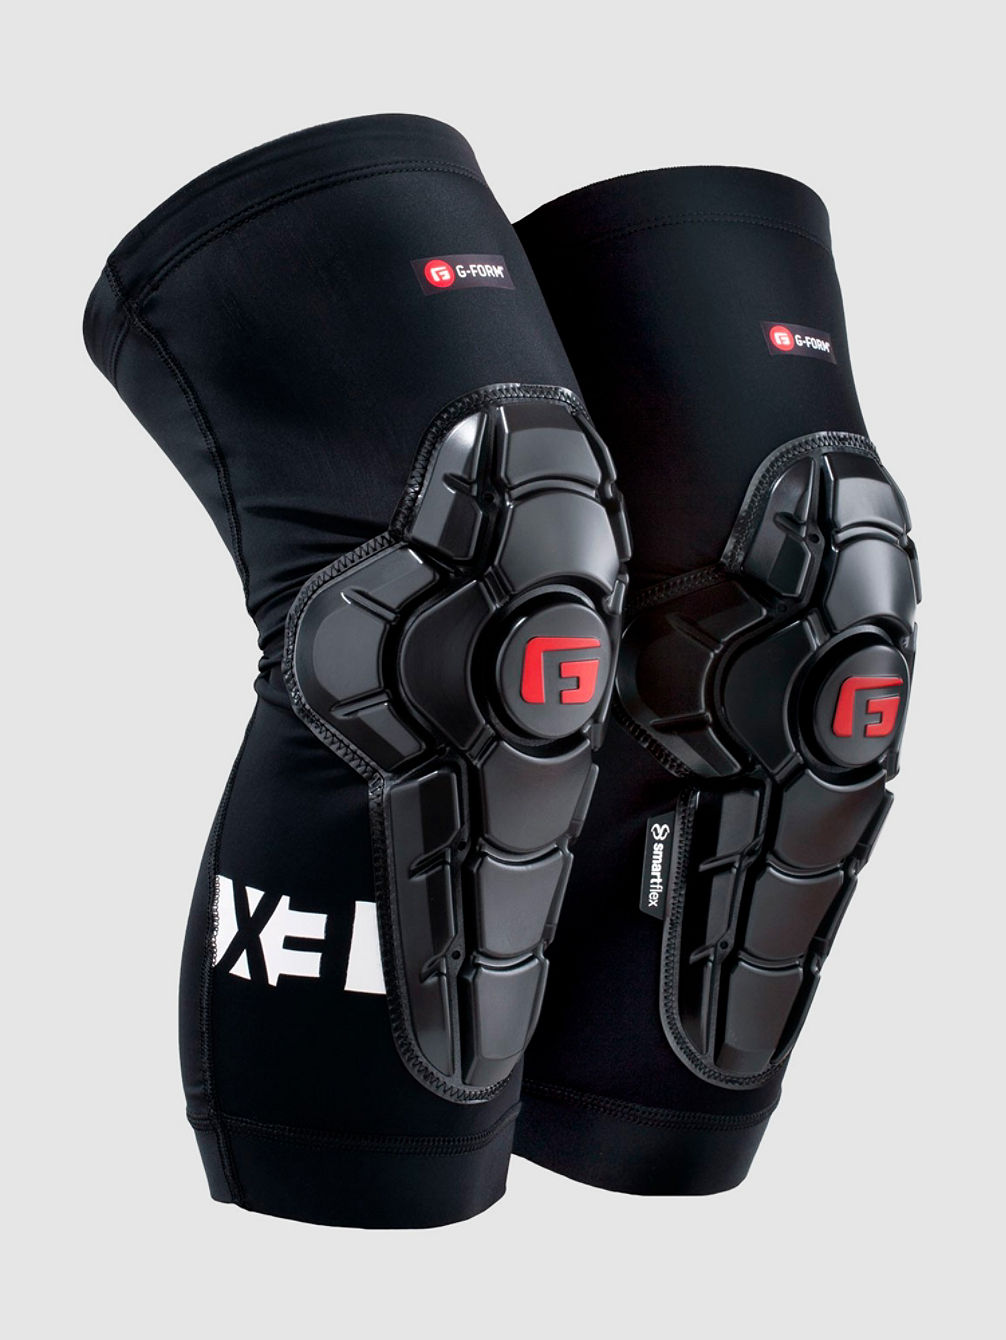 Pro-X3 Guard Knee Protection